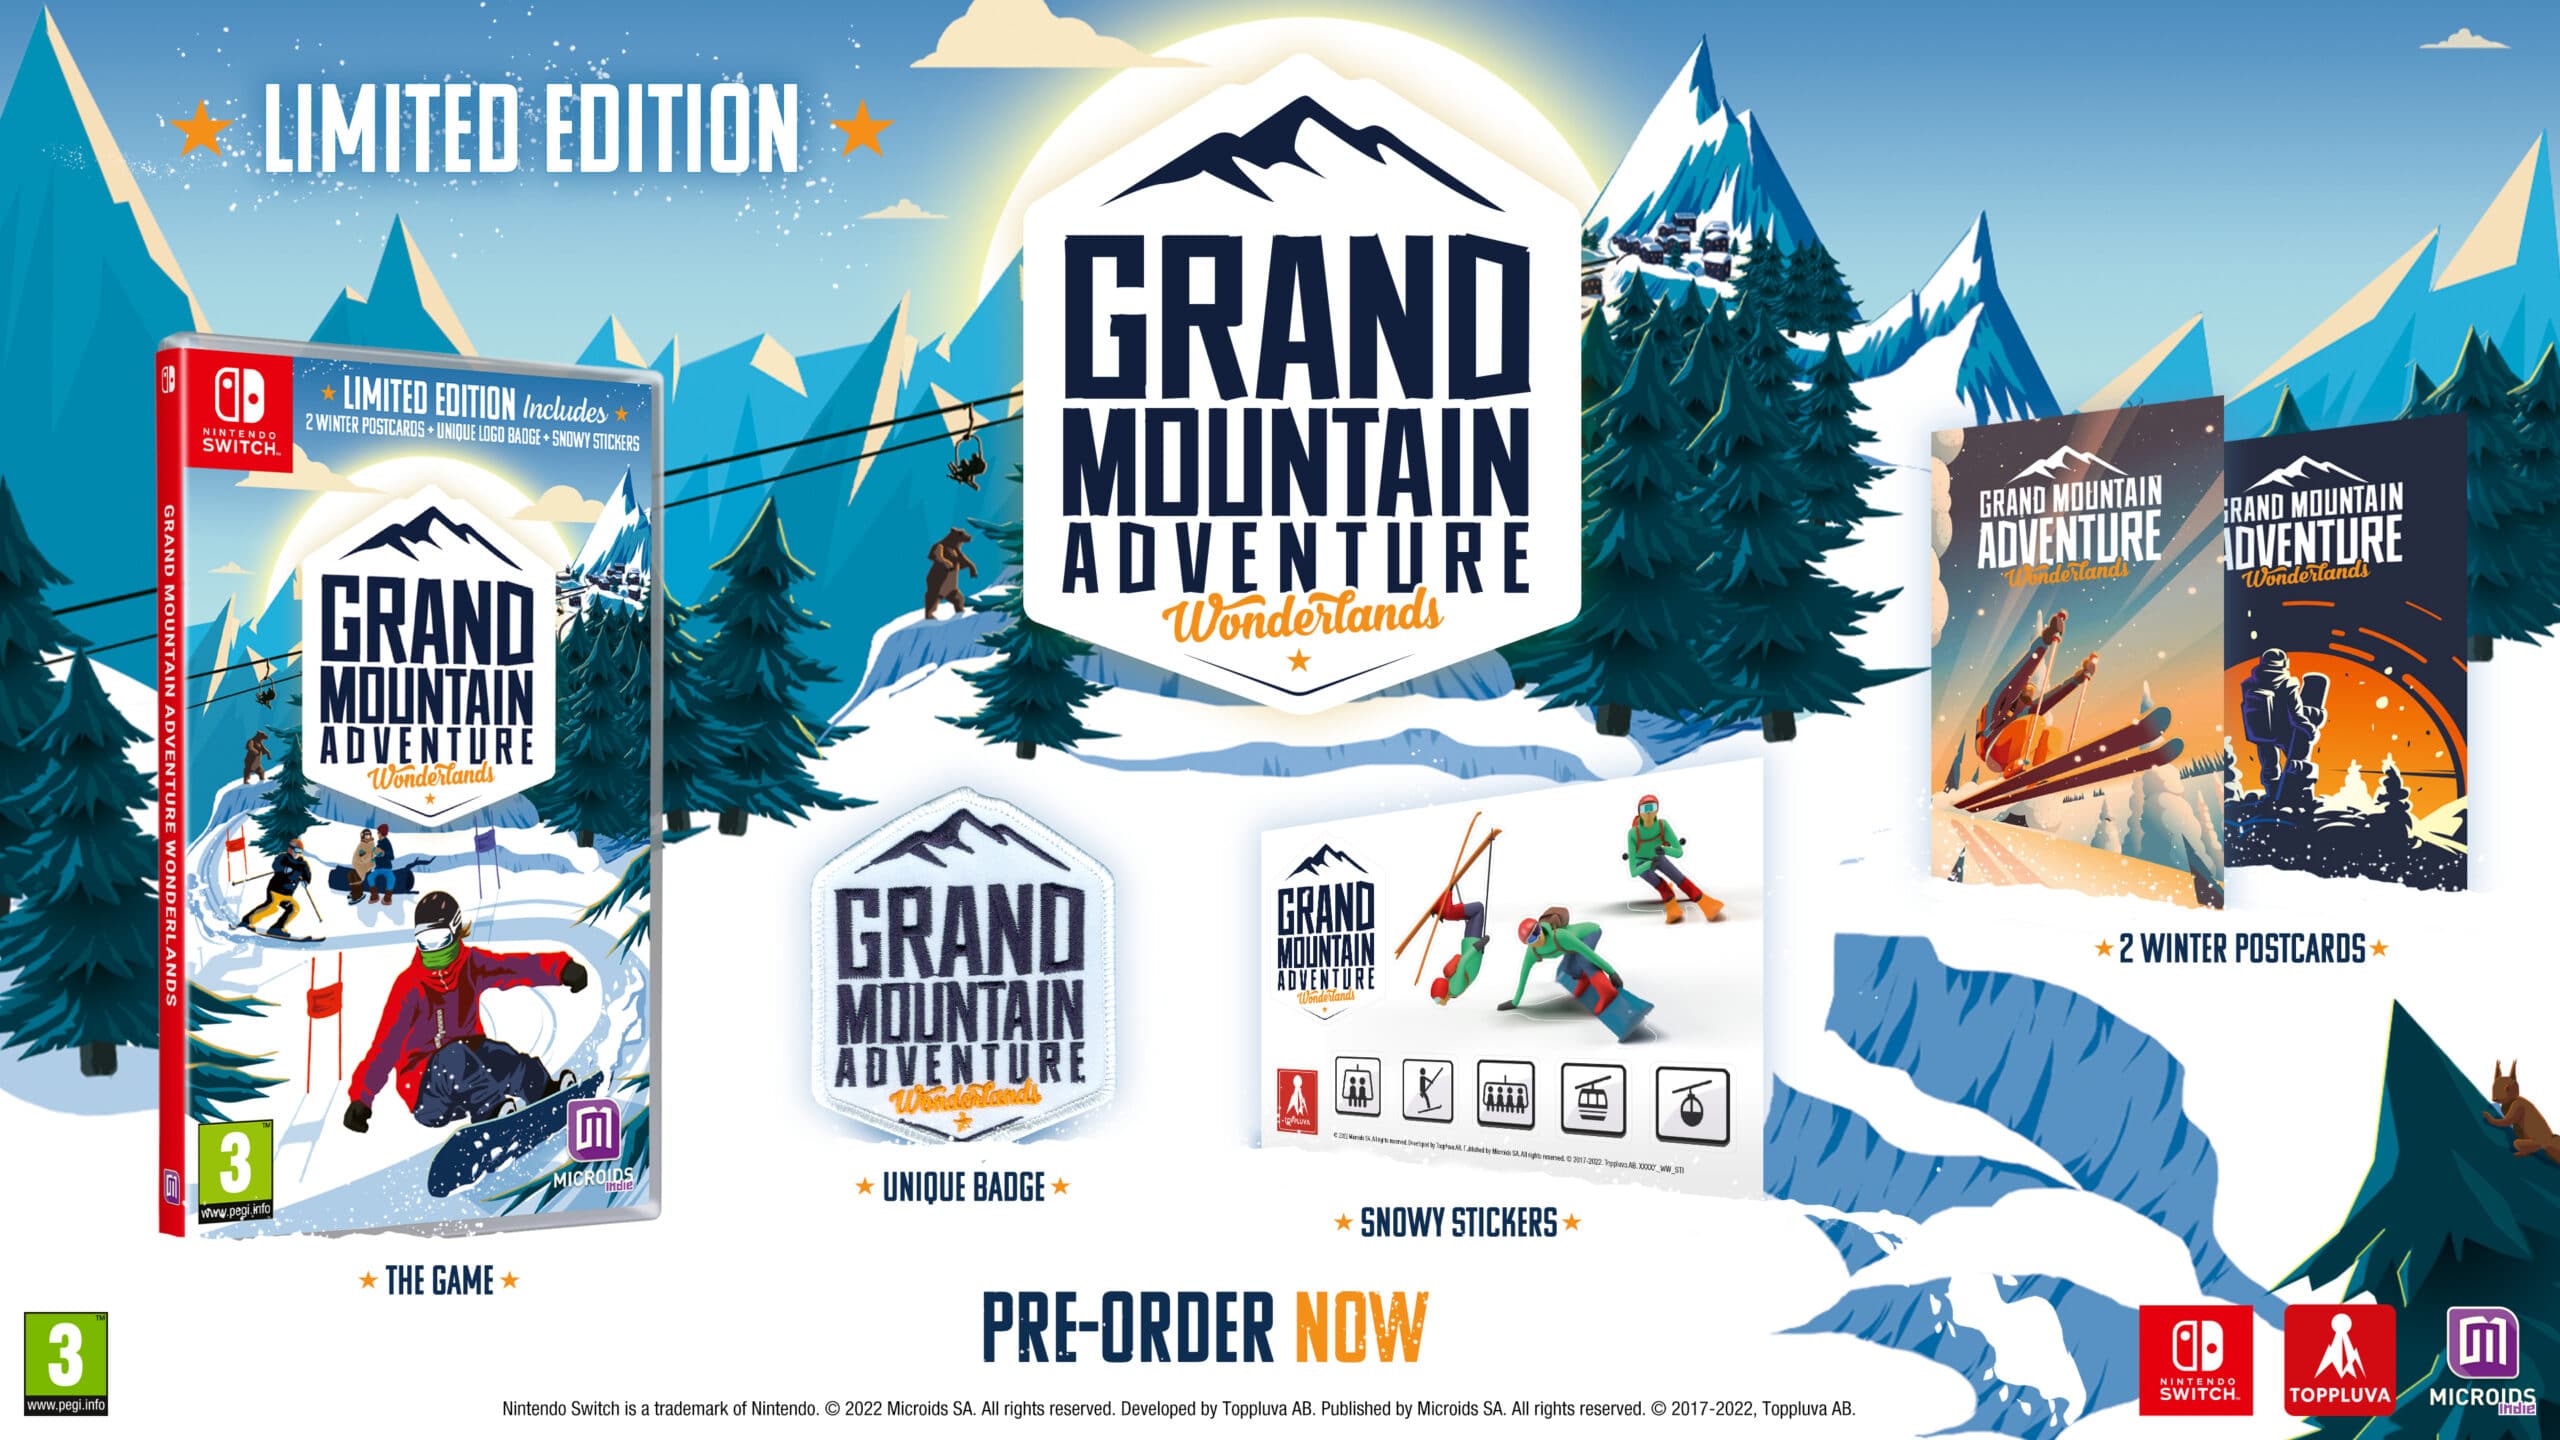 Here is the new trailer for Grand Mountain Adventure: Wonderlands thumbnail